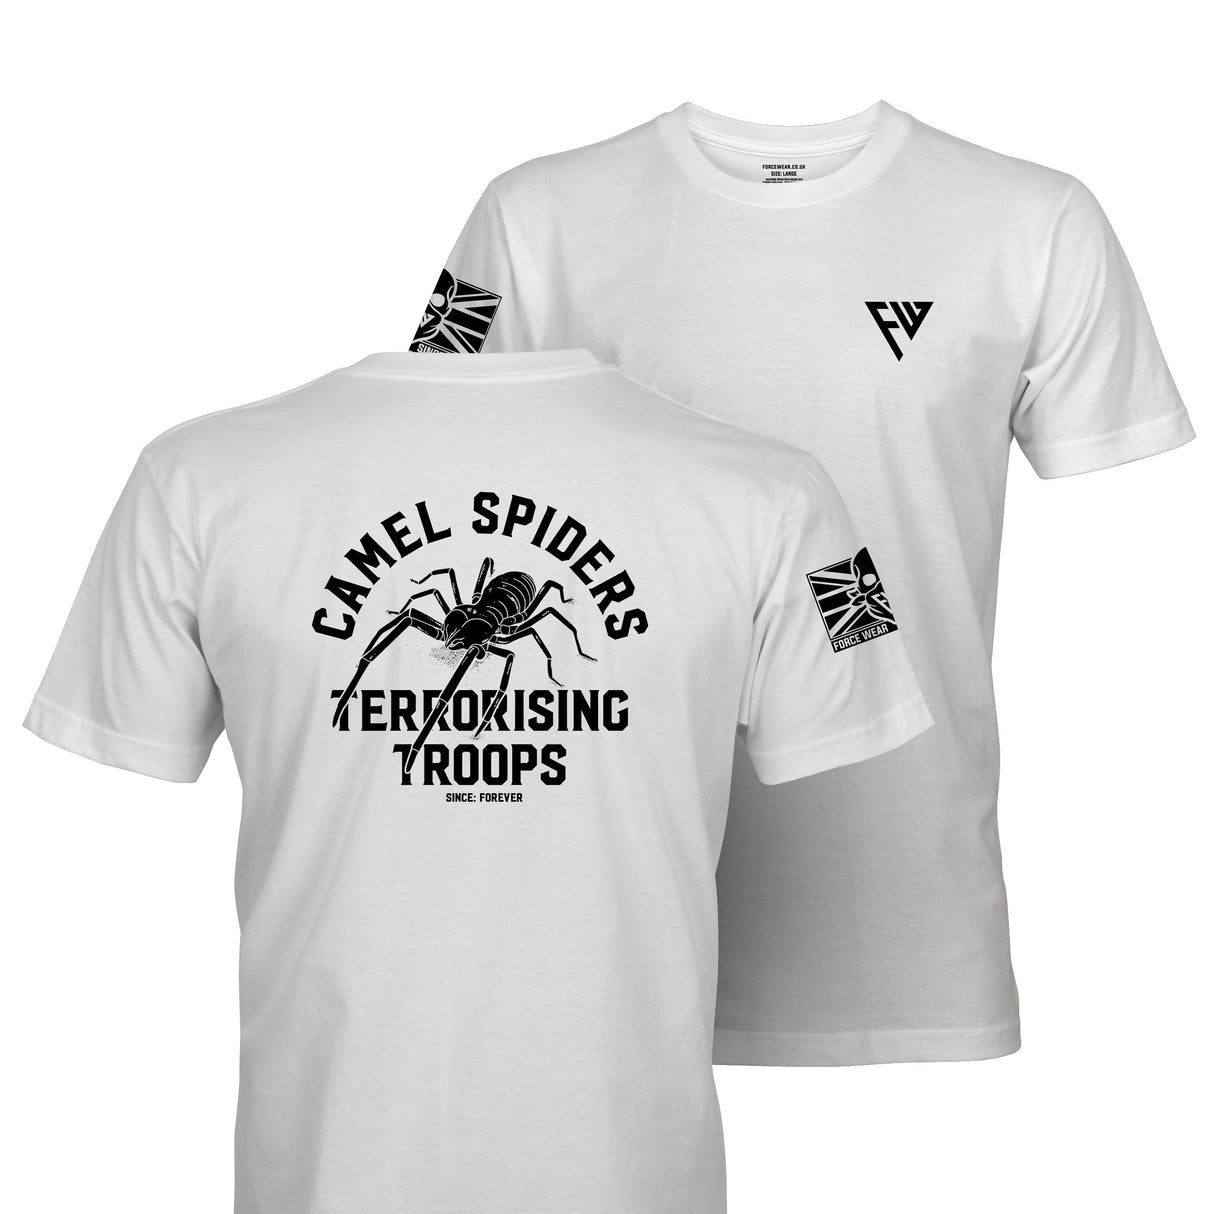 THE CAMEL SPIDER TAG & BACK - Force Wear HQ - T-SHIRTS